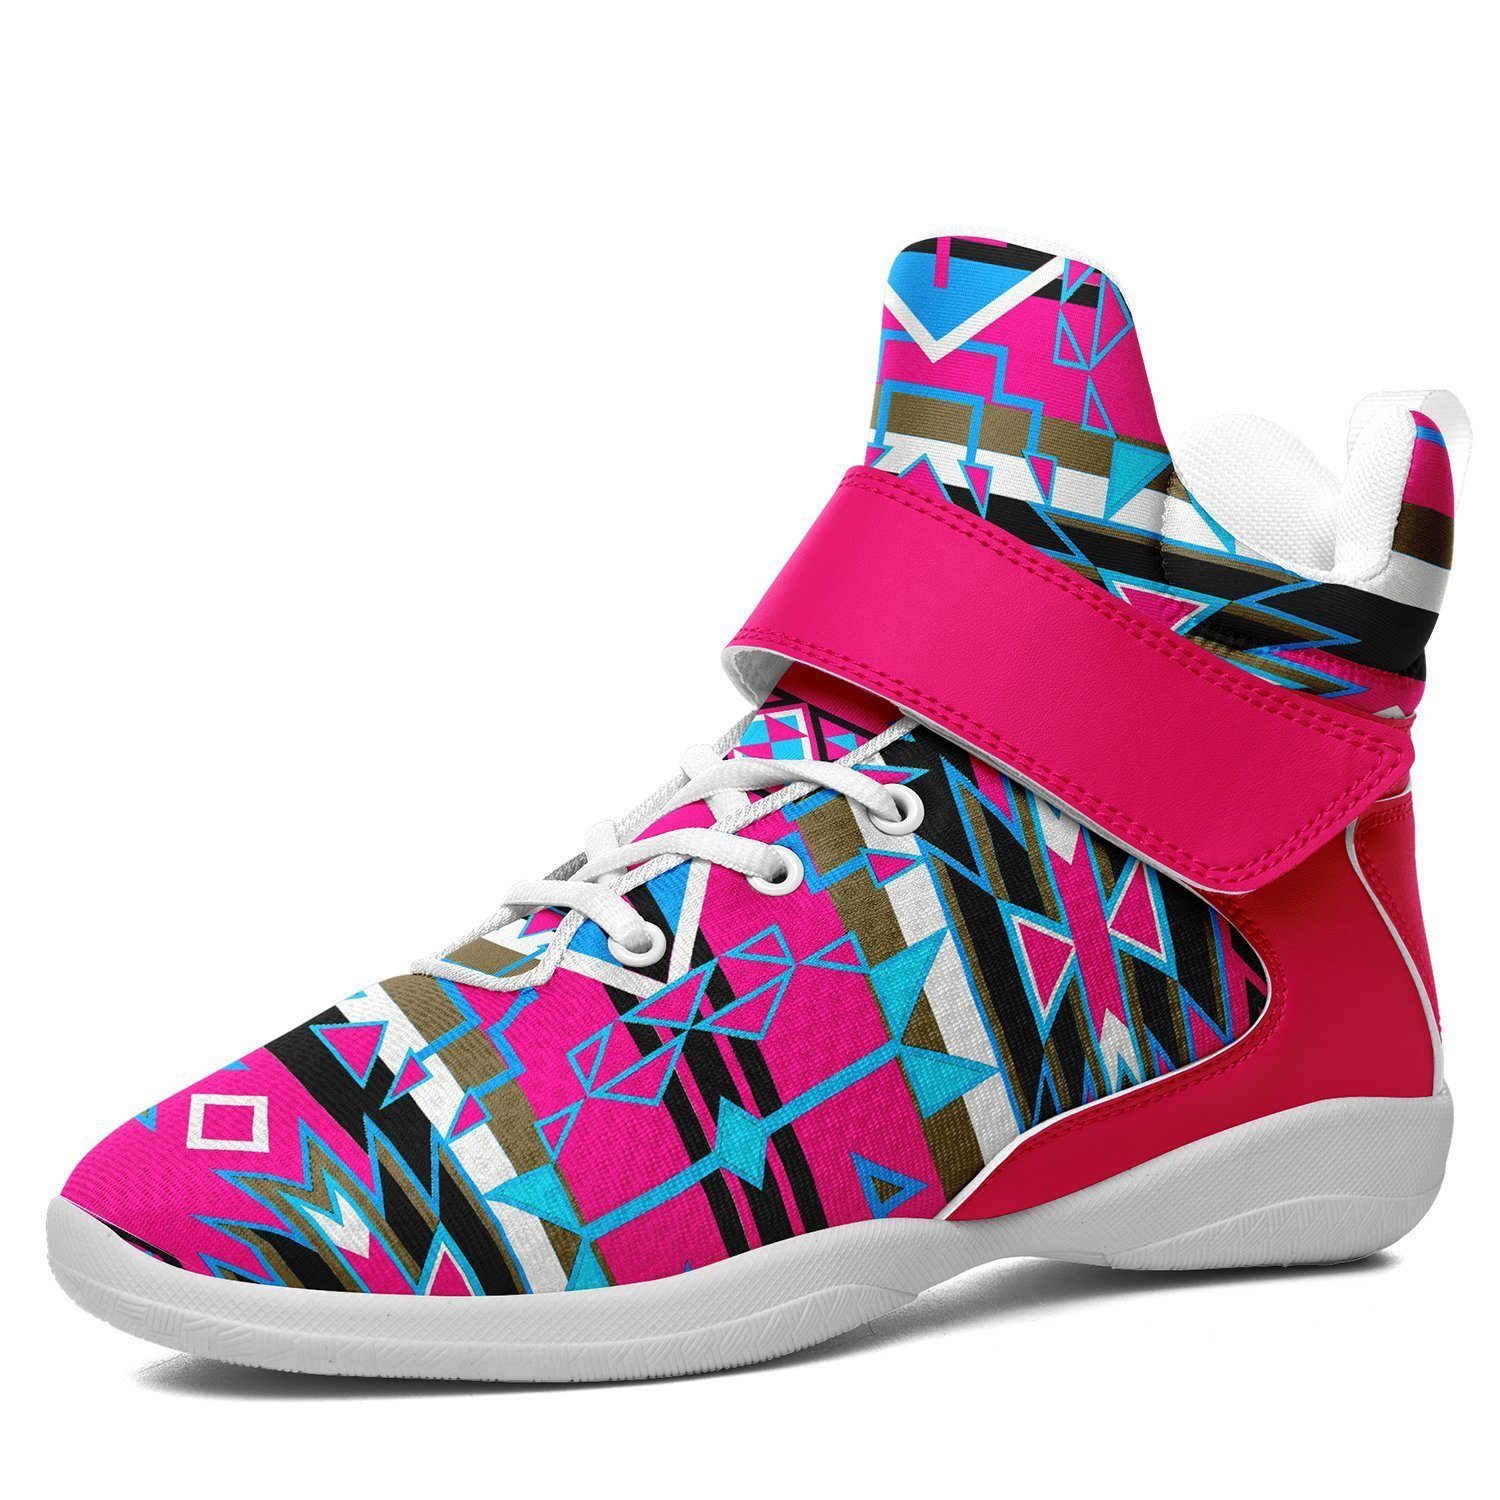 Force of Nature Sunset Storm Kid's Ipottaa Basketball / Sport High Top Shoes 49 Dzine US Child 12.5 / EUR 30 White Sole with Pink Strap 